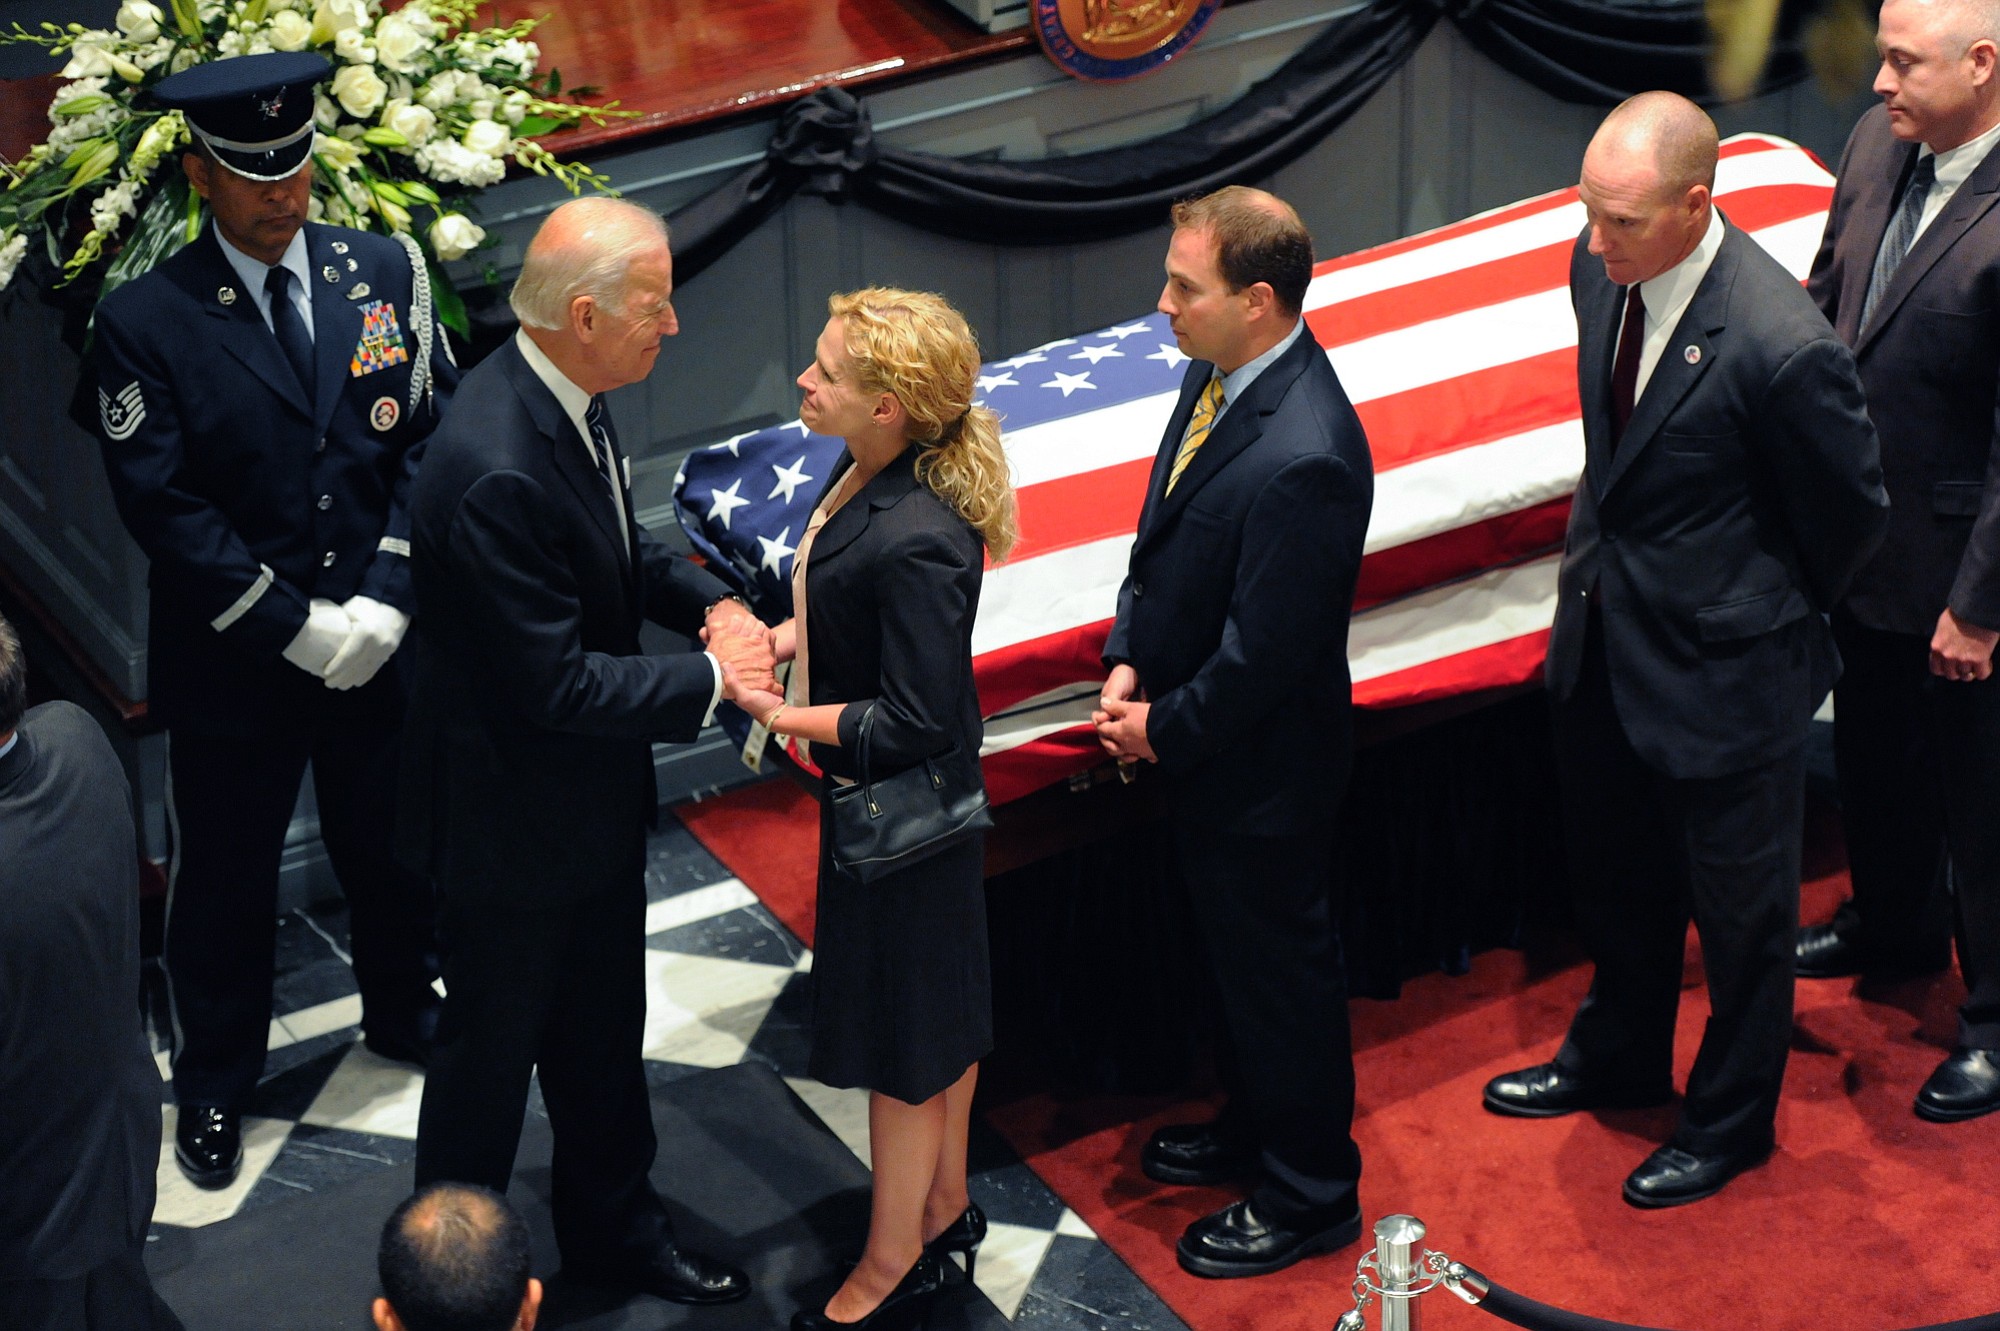 Vice President Joe Biden greets mourners near a casket containing the remains of Biden's son, former Delaware Attorney General Beau Biden, during a viewing, Thursday, June 4, 2015, at Legislative Hall in Dover, Del. Beau Biden died of brain cancer Saturday at age 46.